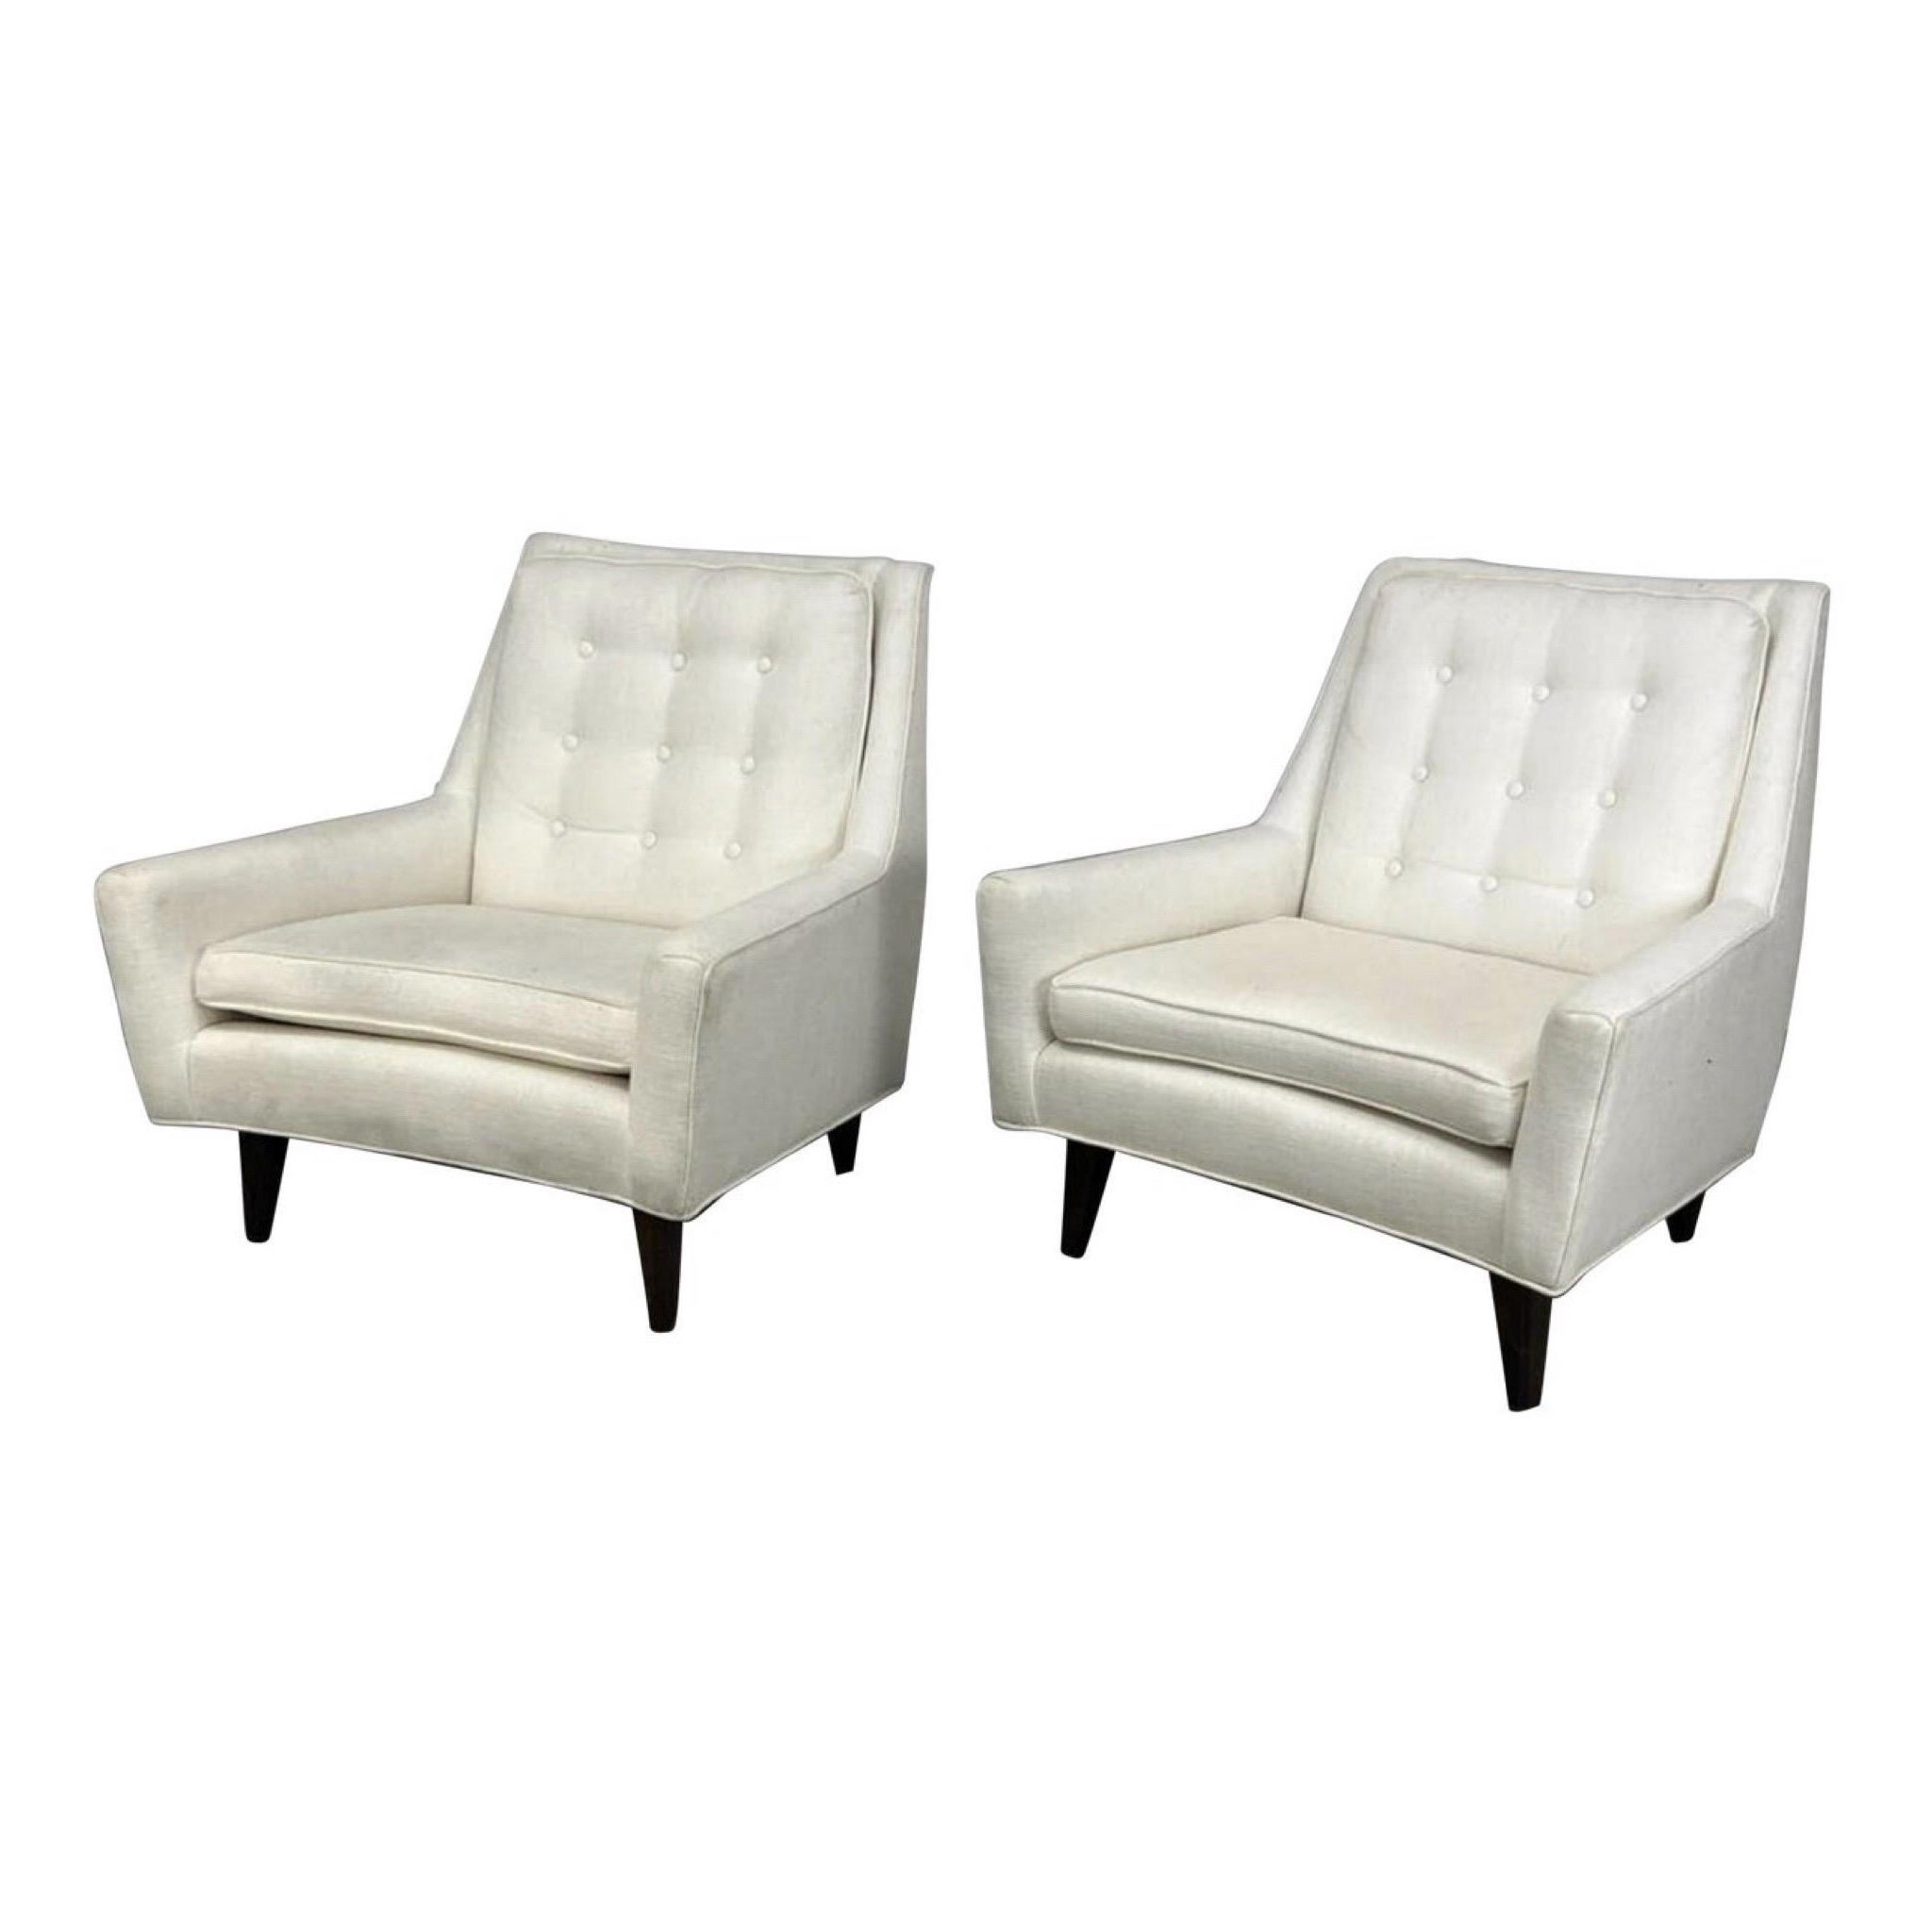 Edward Wormley Attributed White Upholstered Lounge Chairs - a Pair